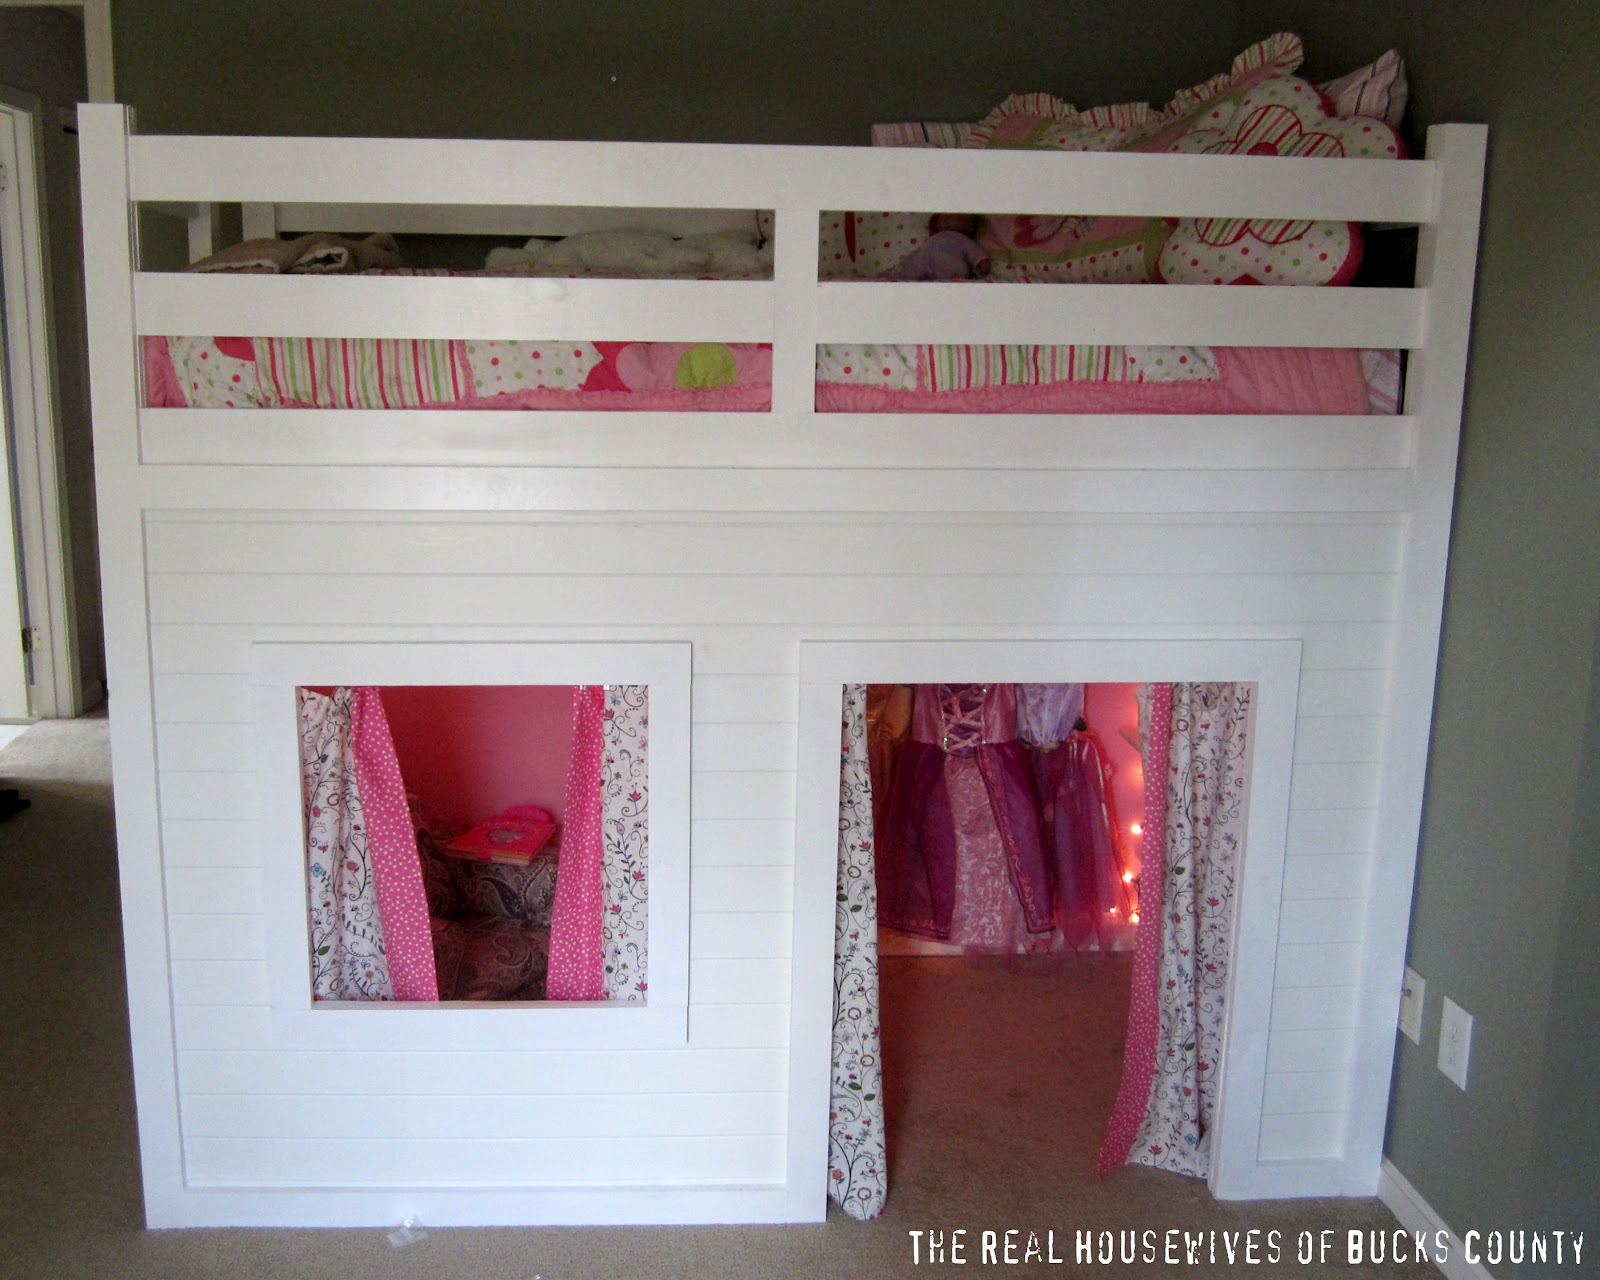 how to make a loft bed